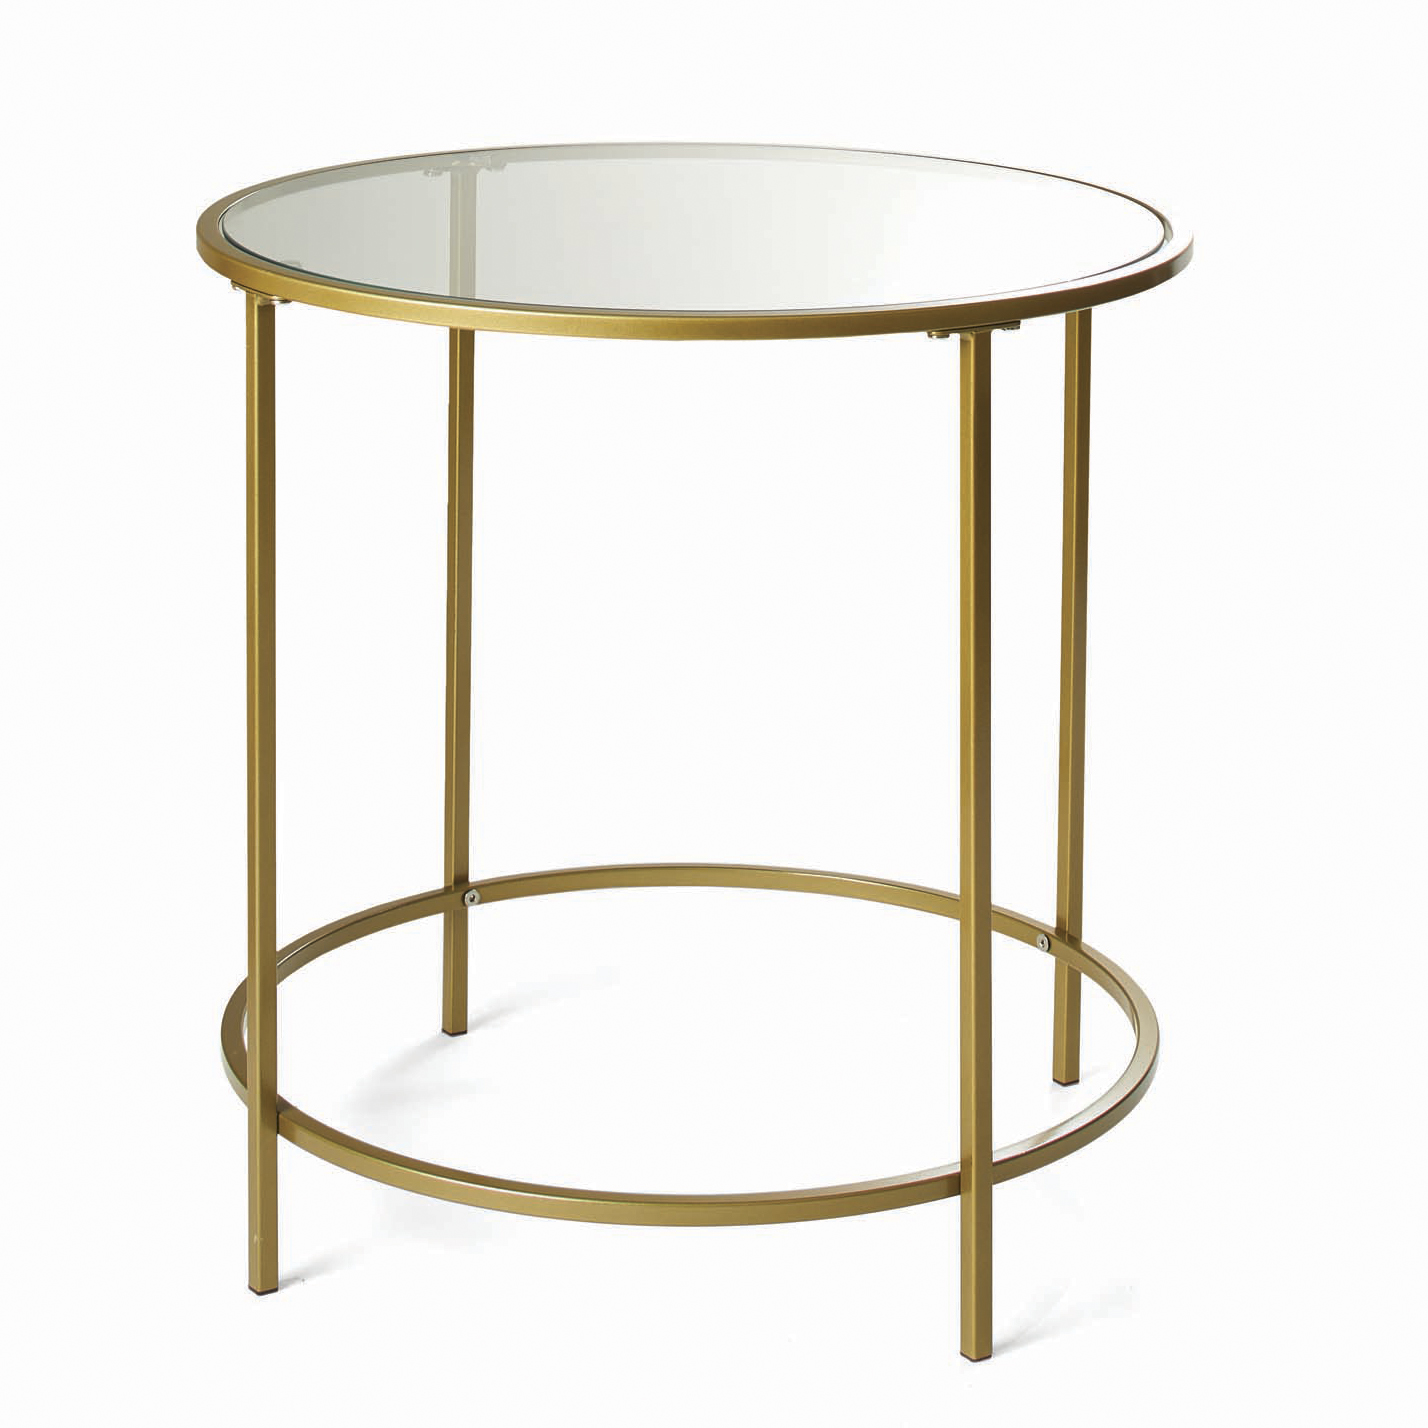 Better Homes & Gardens Nola Side Table, Gold Finish - image 1 of 6